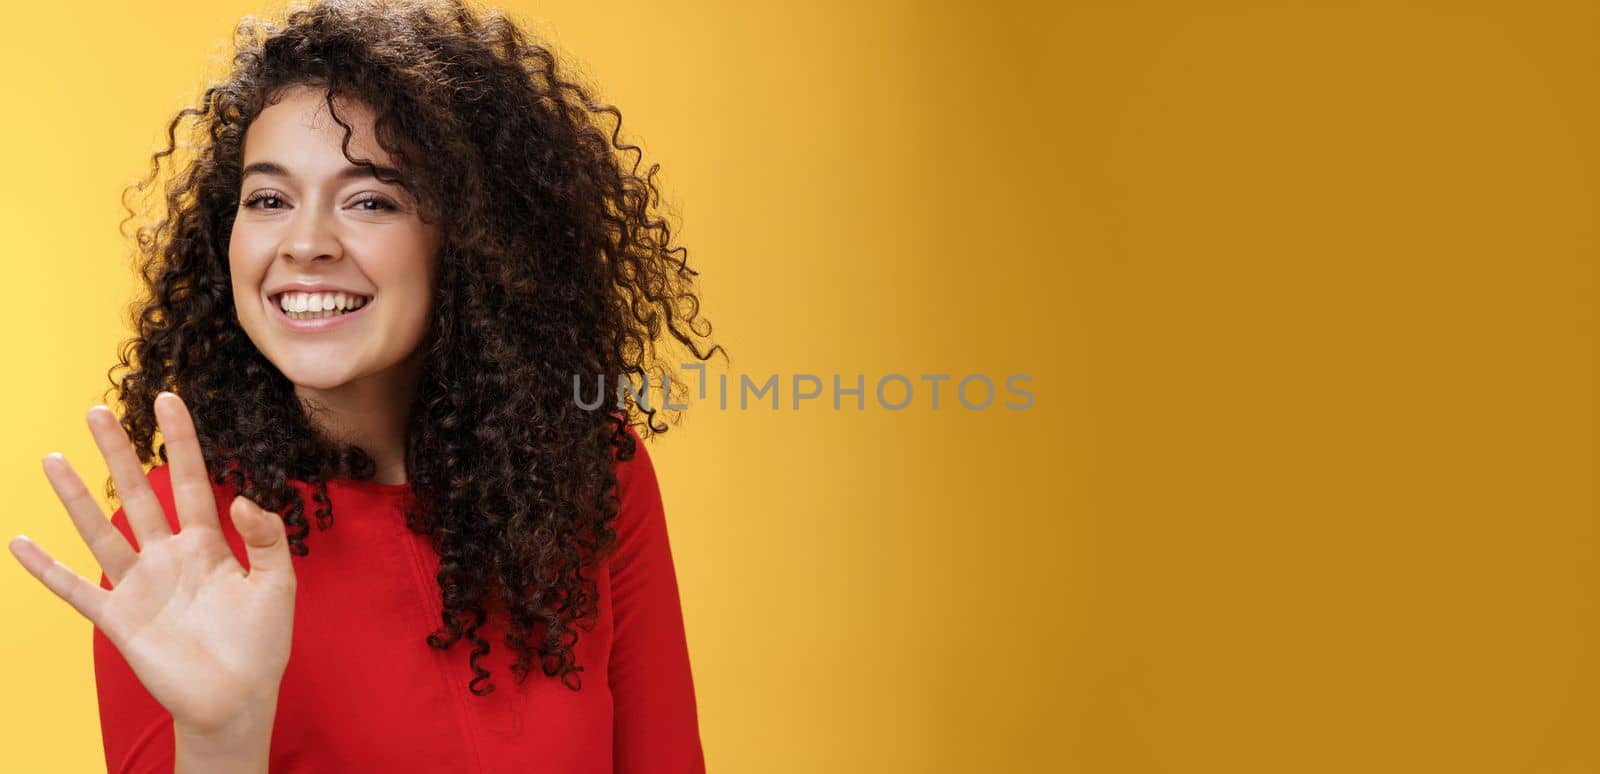 Lifestyle. Charming friendly and self-assured attractive curly woman waving cute with palm to say hi or hello smiling broadly greeting man trying flirt in party posing joyful over yellow background.